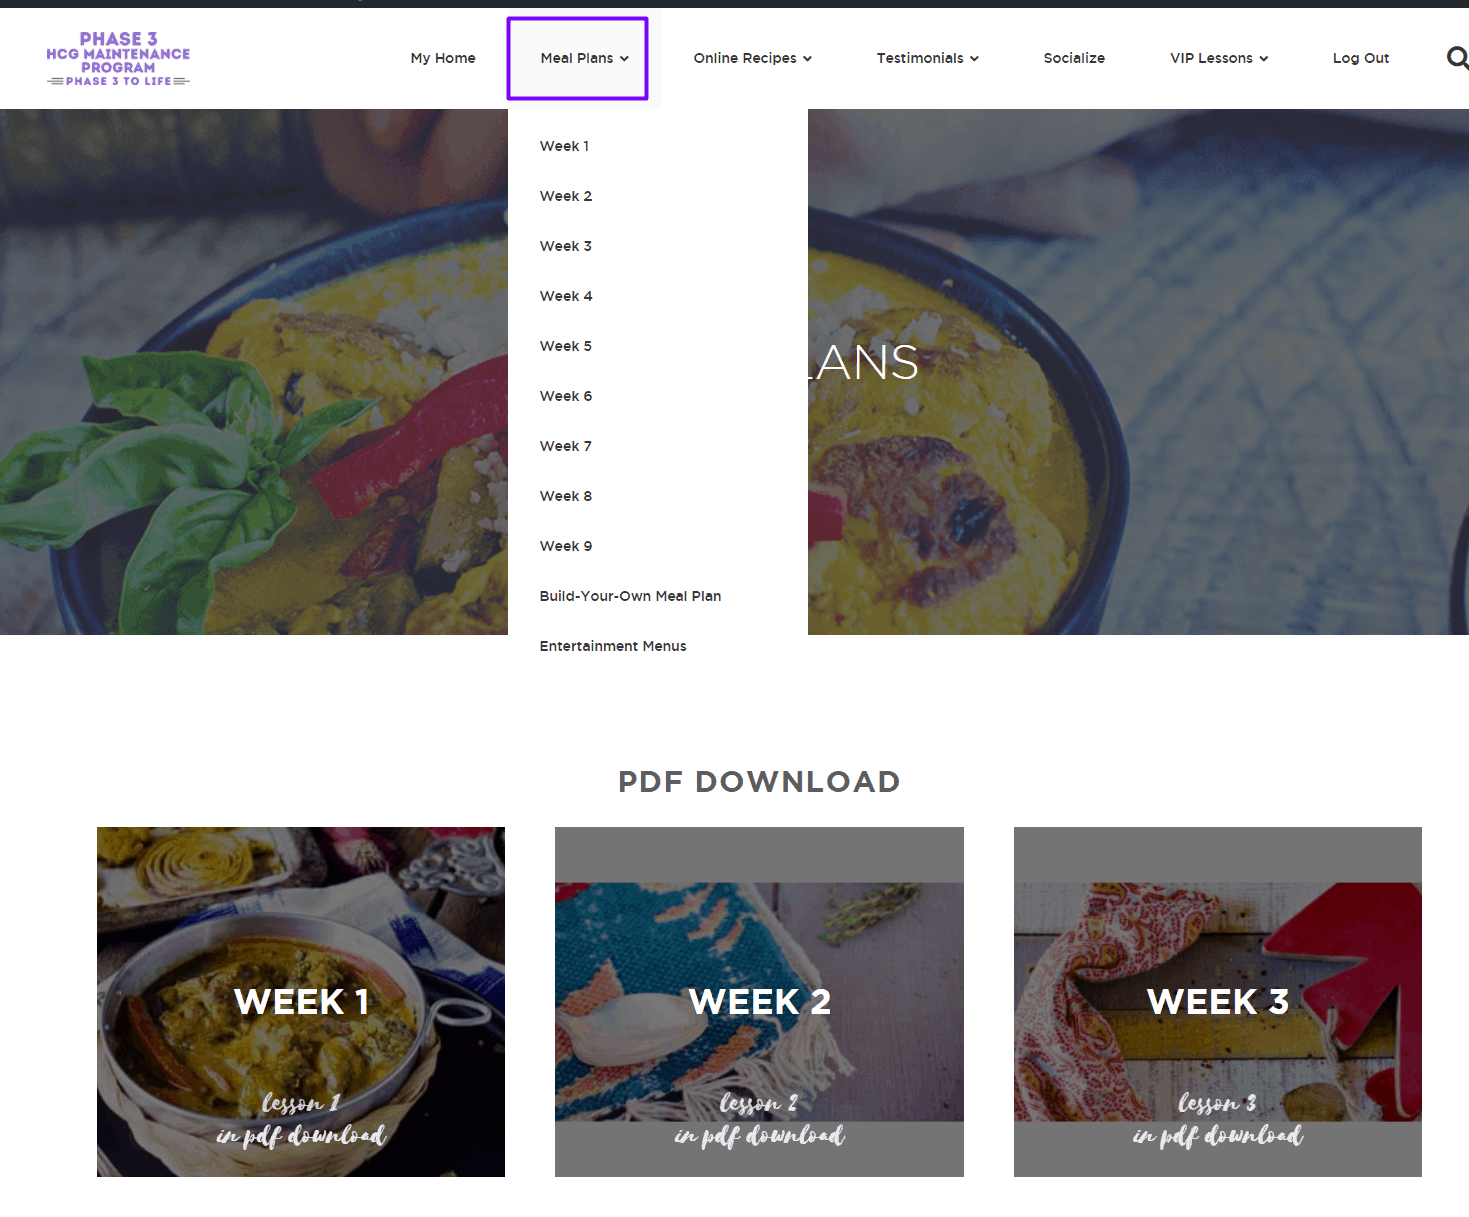 where-to-access-meal-plans-pdf